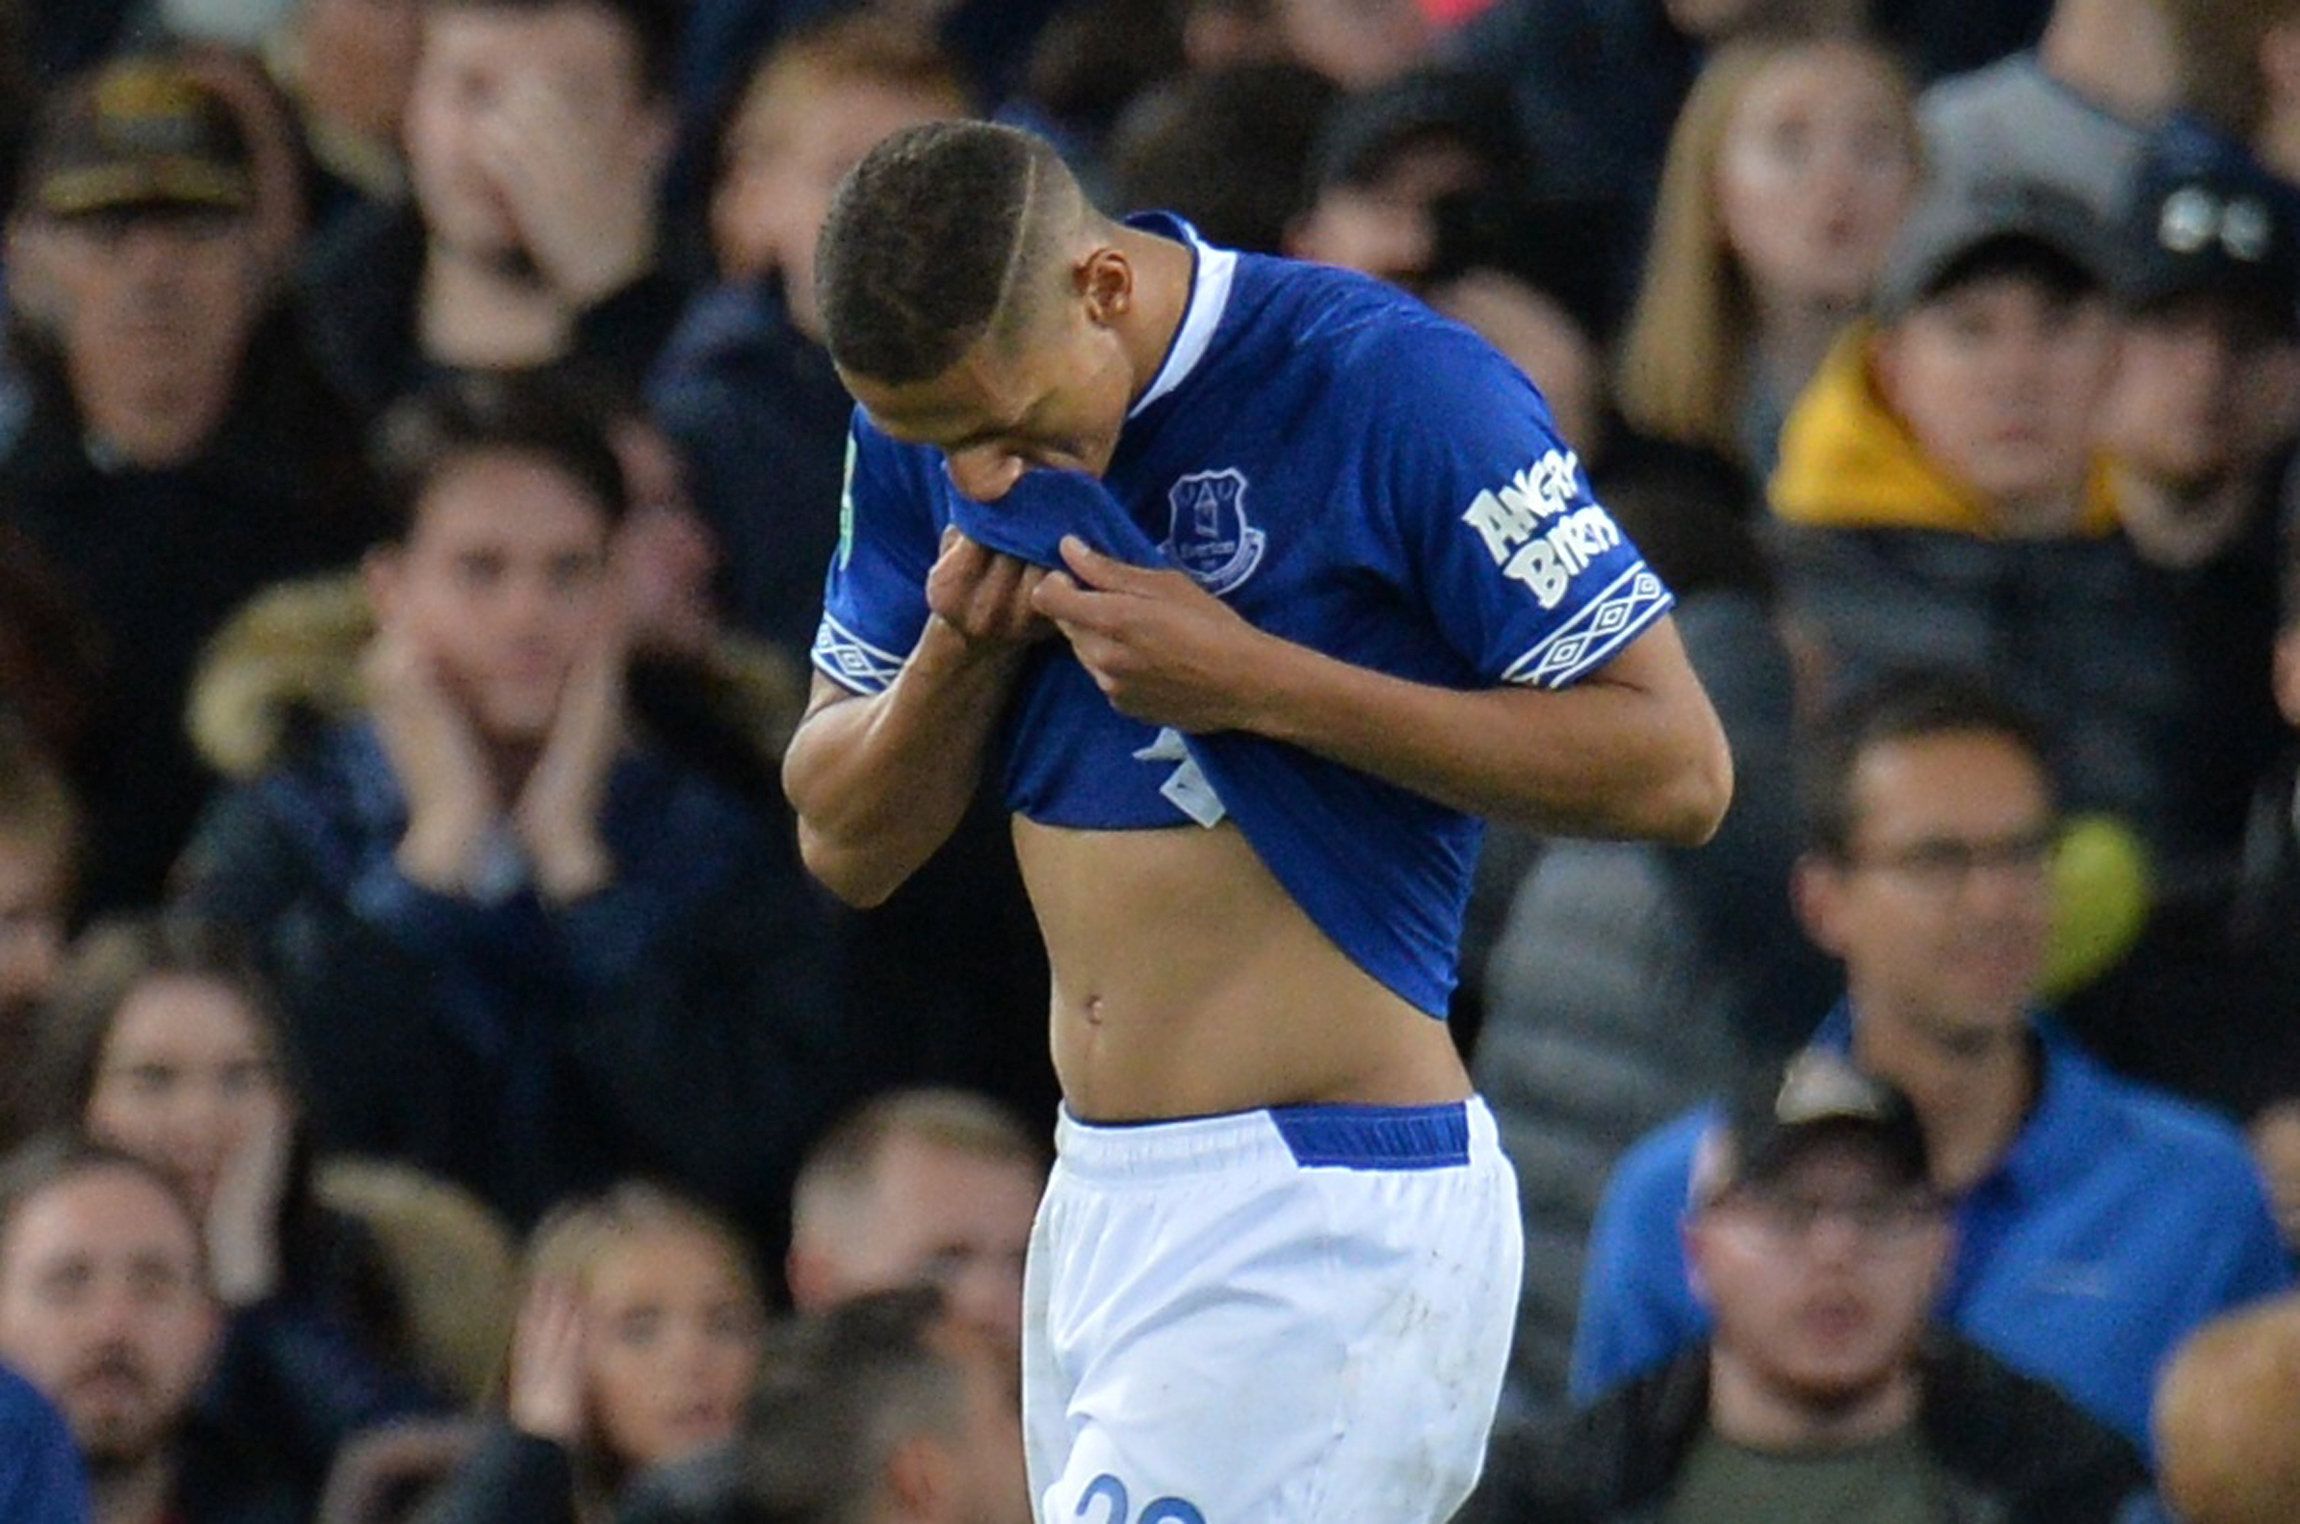 Soccer Football - Carabao Cup - Third Round - Everton v Southampton - Goodison Park, Liverpool, Britain - October 2, 2018  Everton's Richarlison looks dejected after missing a penalty during the shootout  REUTERS/Peter Powell  EDITORIAL USE ONLY. No use with unauthorized audio, video, data, fixture lists, club/league logos or 